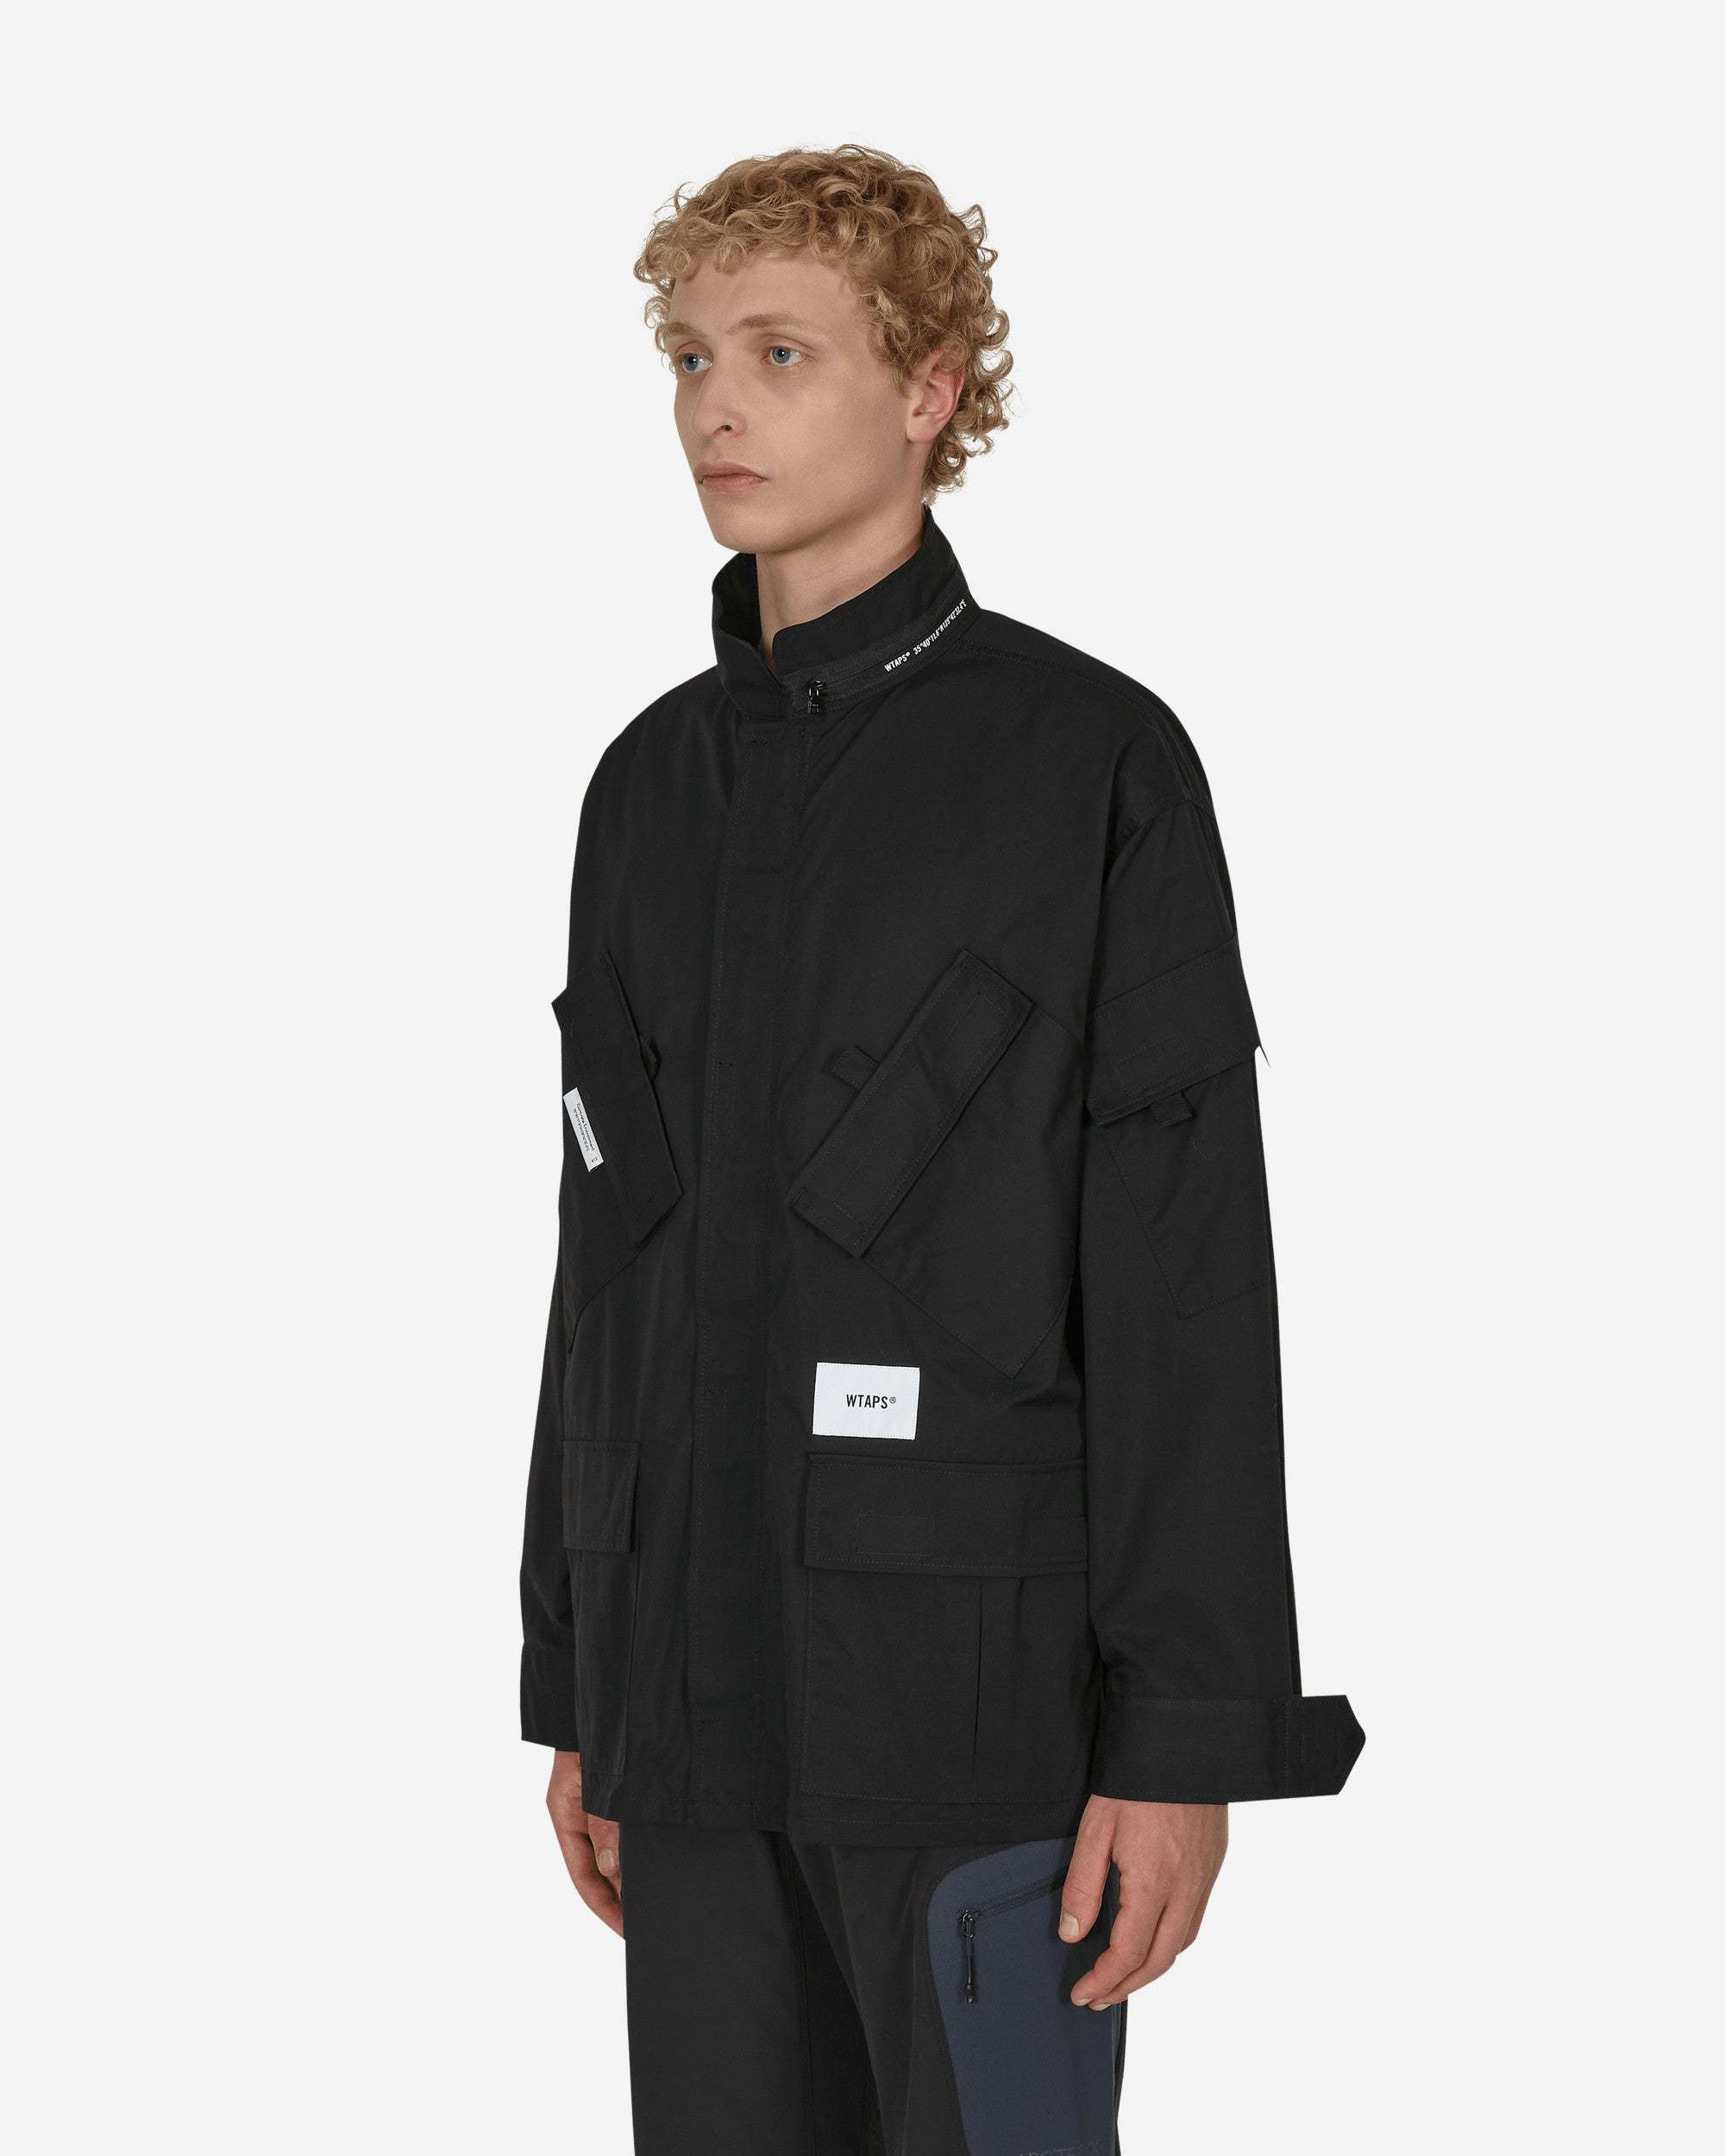 SS WTAPS CONCEAL JACKET BLACK